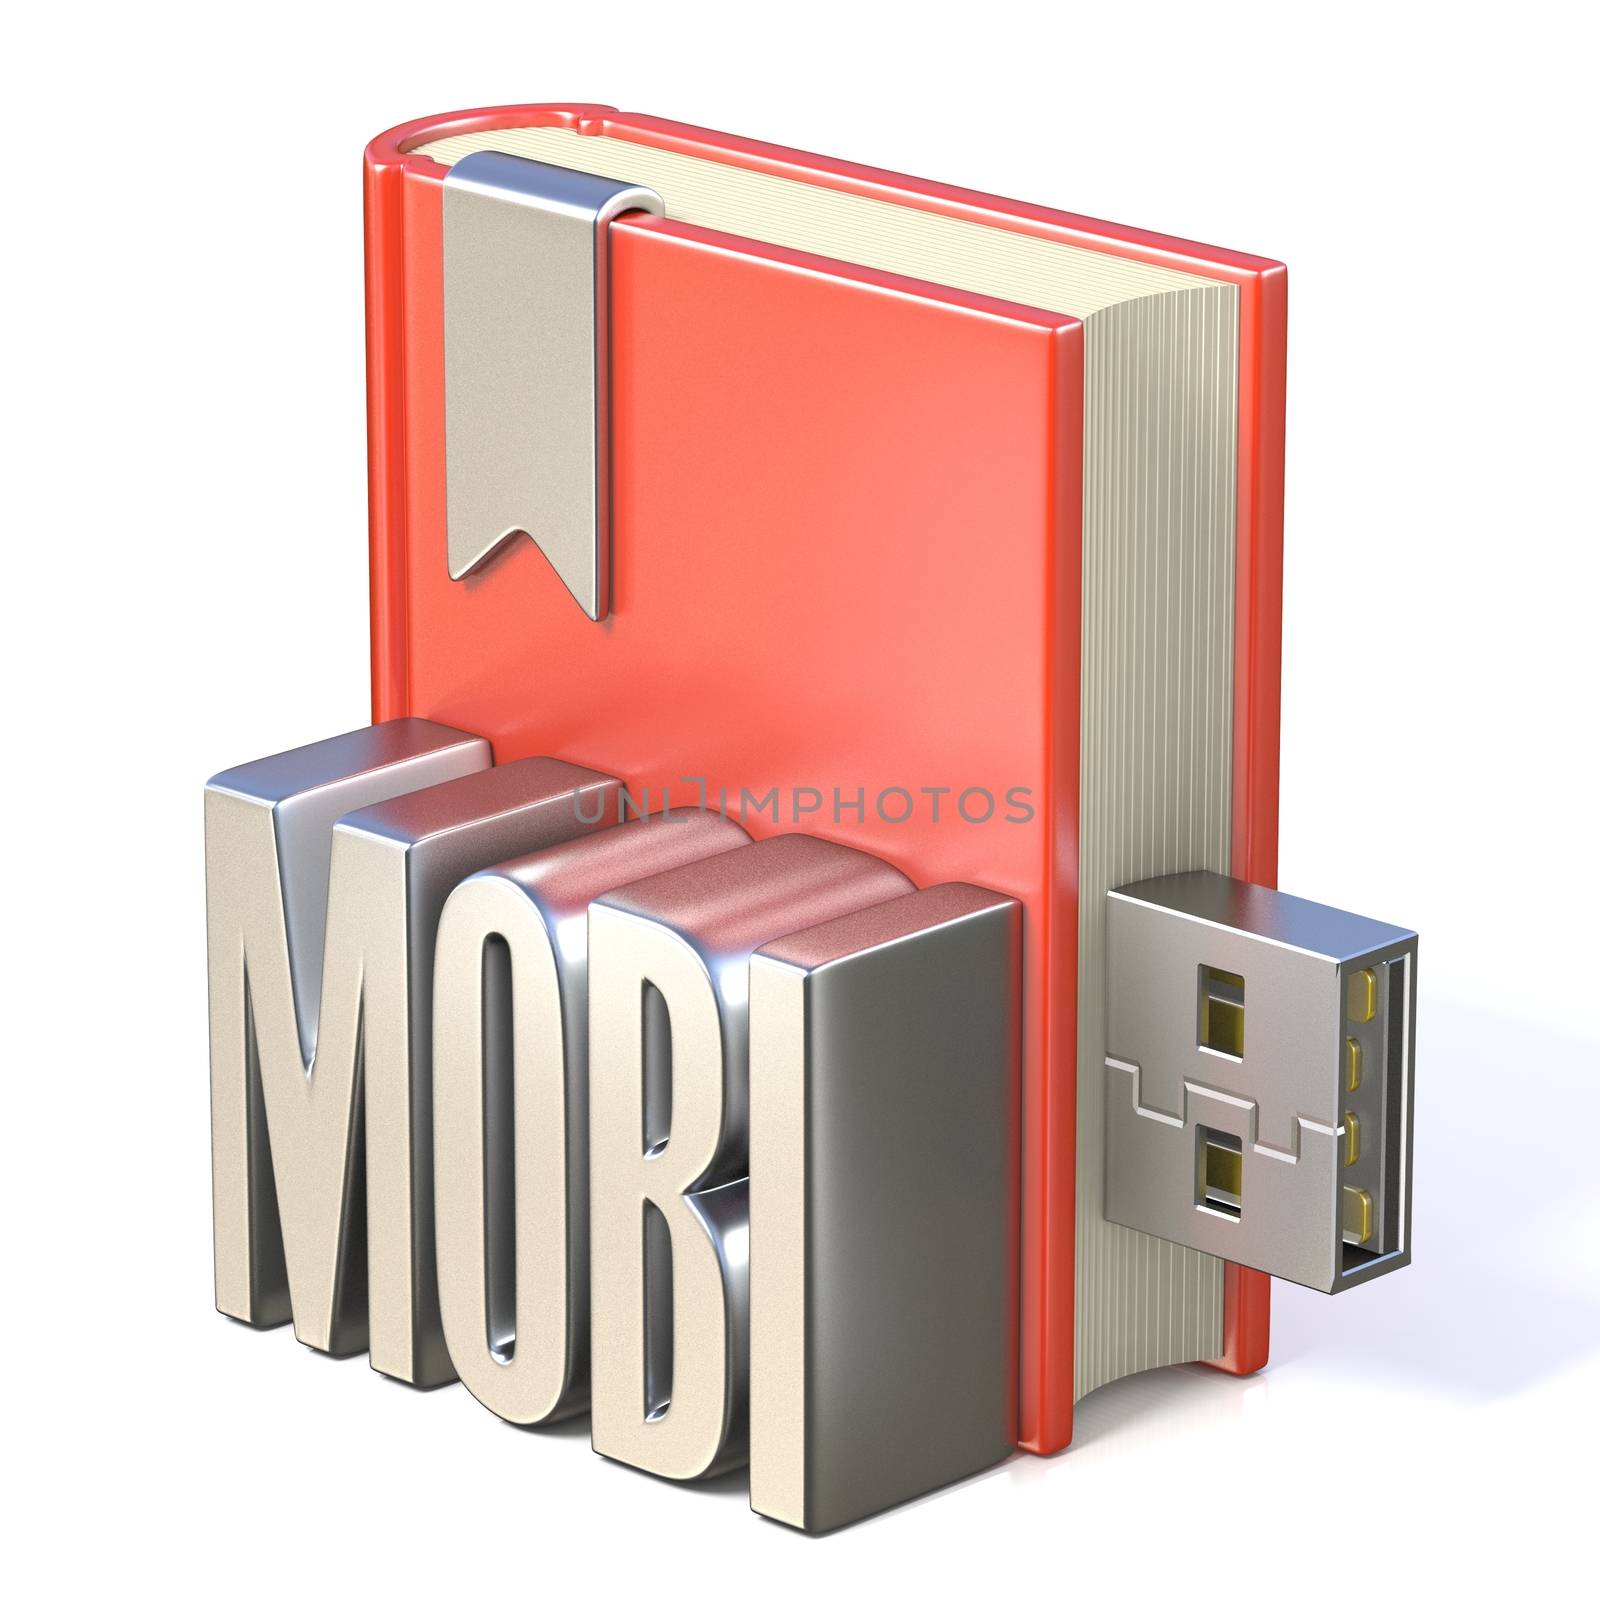 eBook icon metal MOBI red book USB 3D render illustration isolated on white background